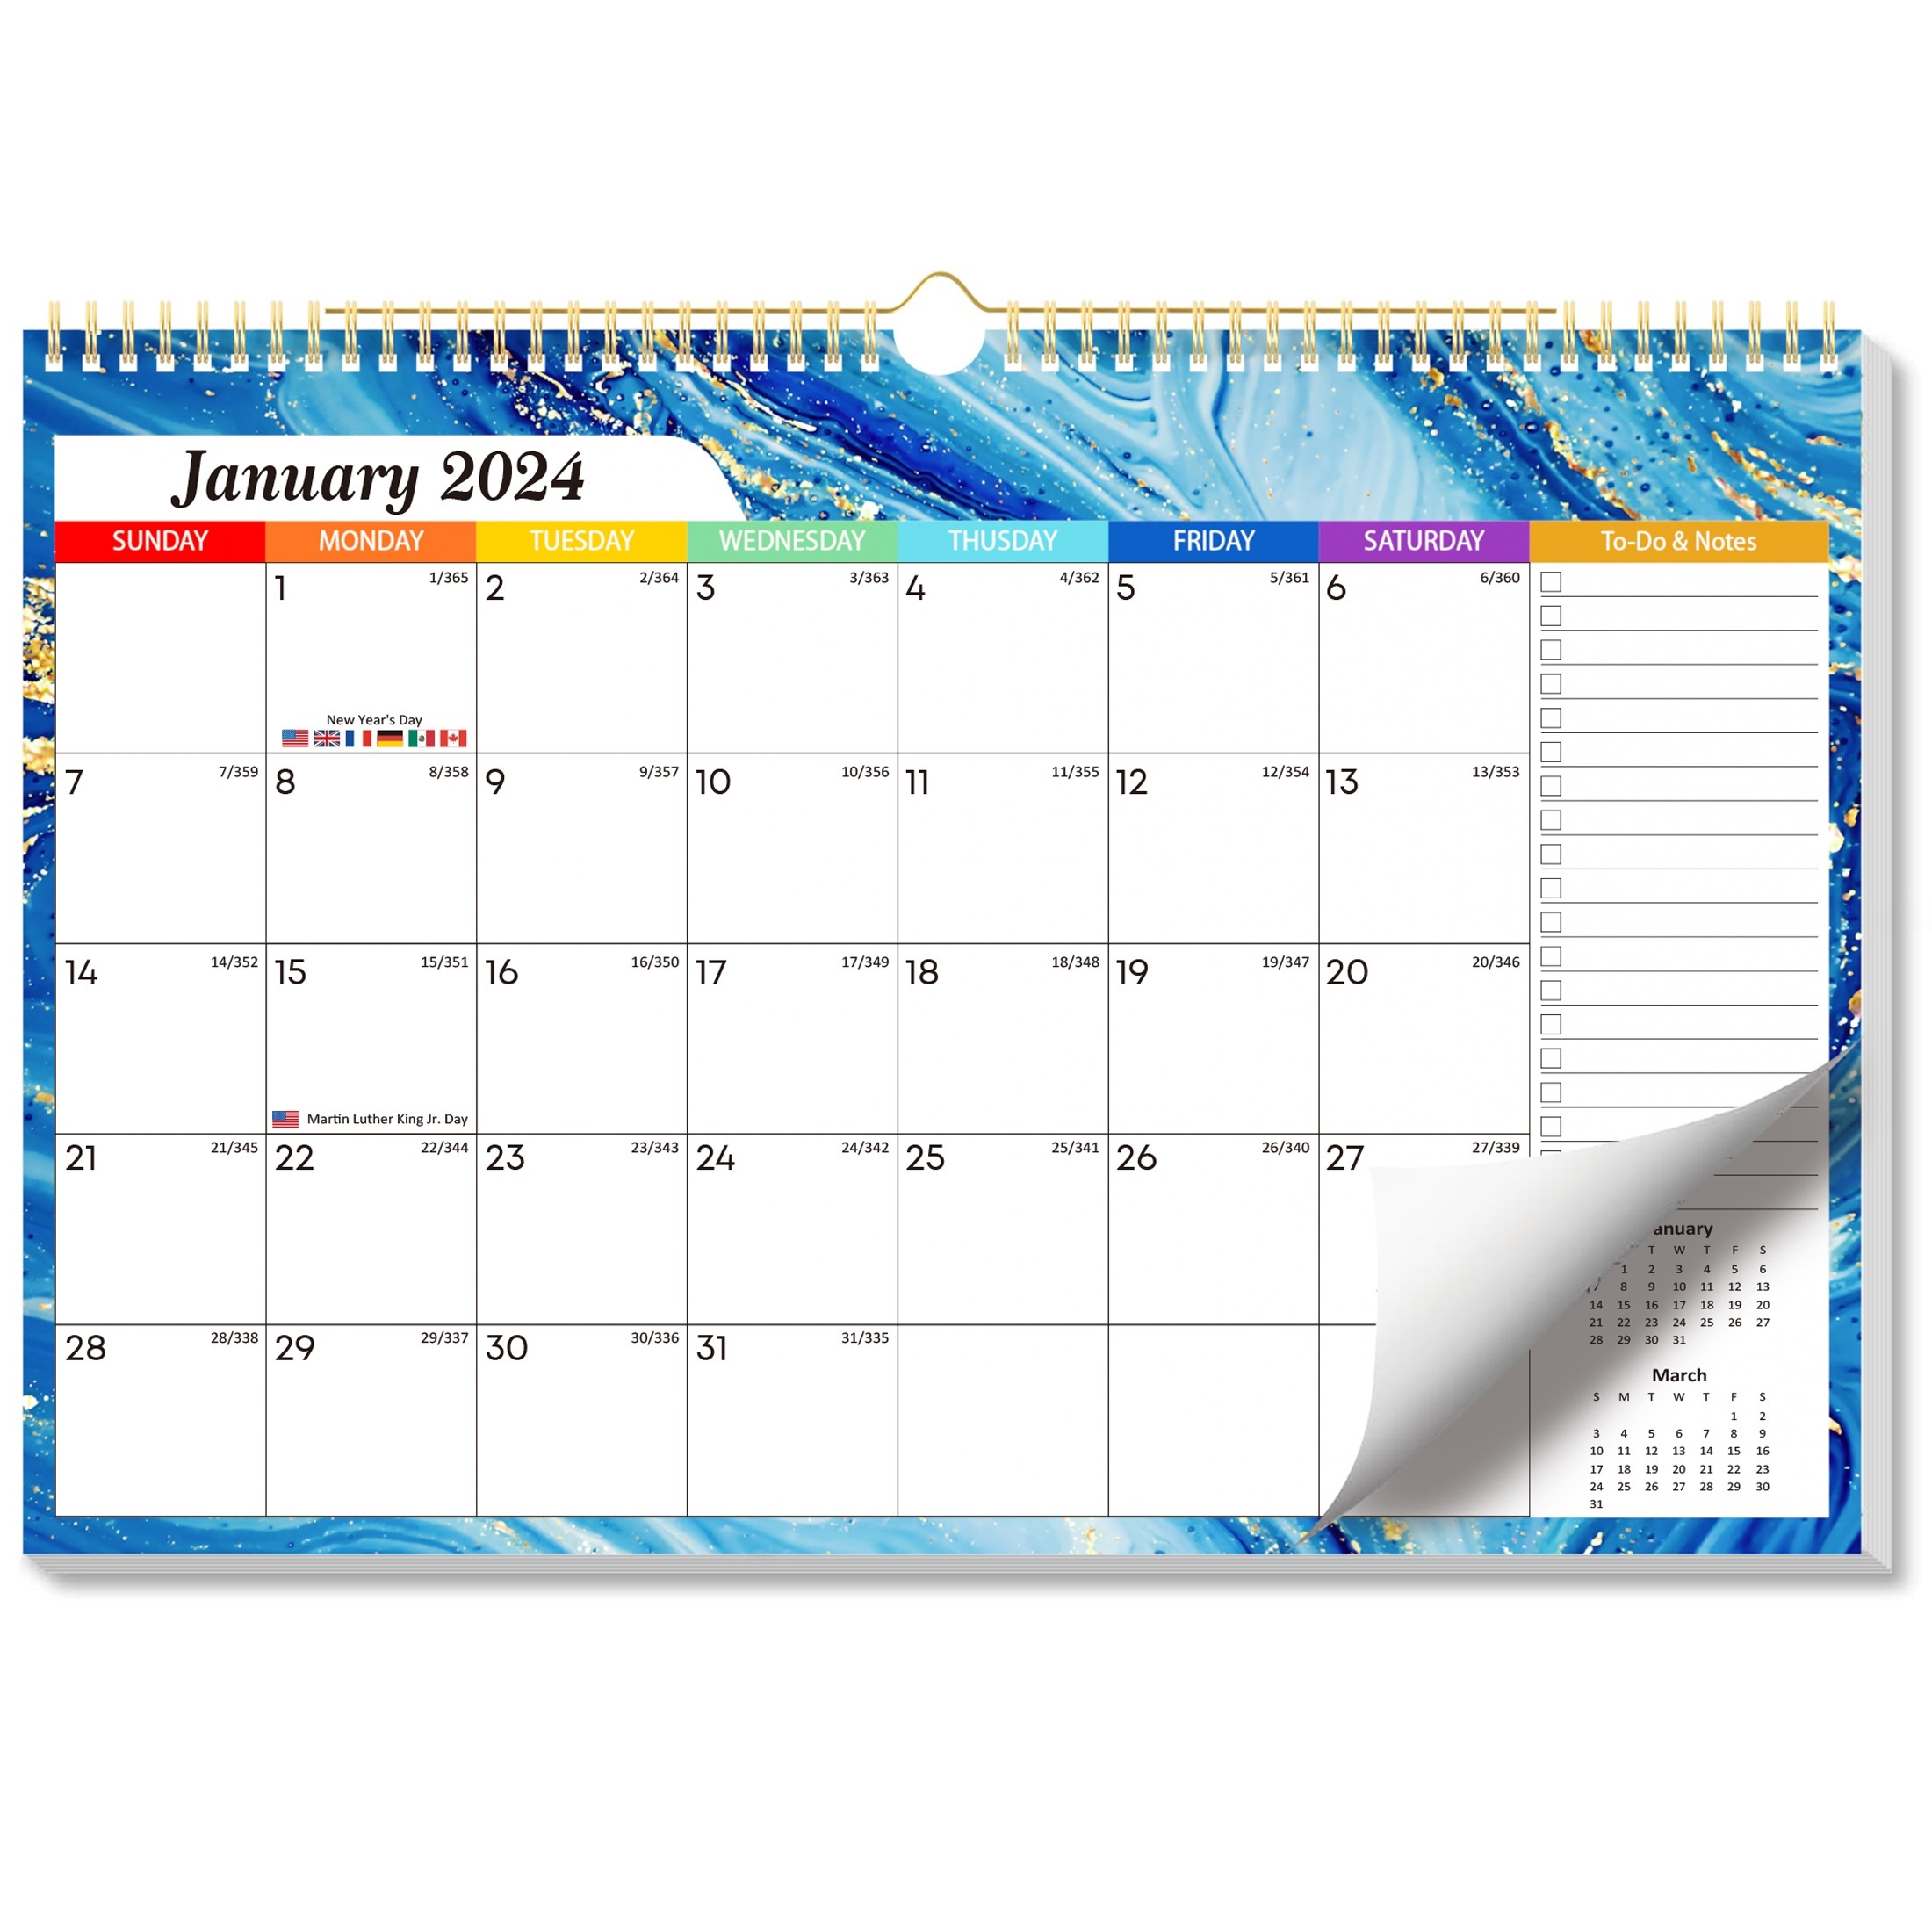 Calendar 2023 2024 July 2023 December 2024 18 Monthly Wall Calendar 17 X 12  Inch Thick Paper With Plastic Cover Protects And Corner Protectors For Home  School Office Includes Stickers Colorful, 90 Days Buyer Protection